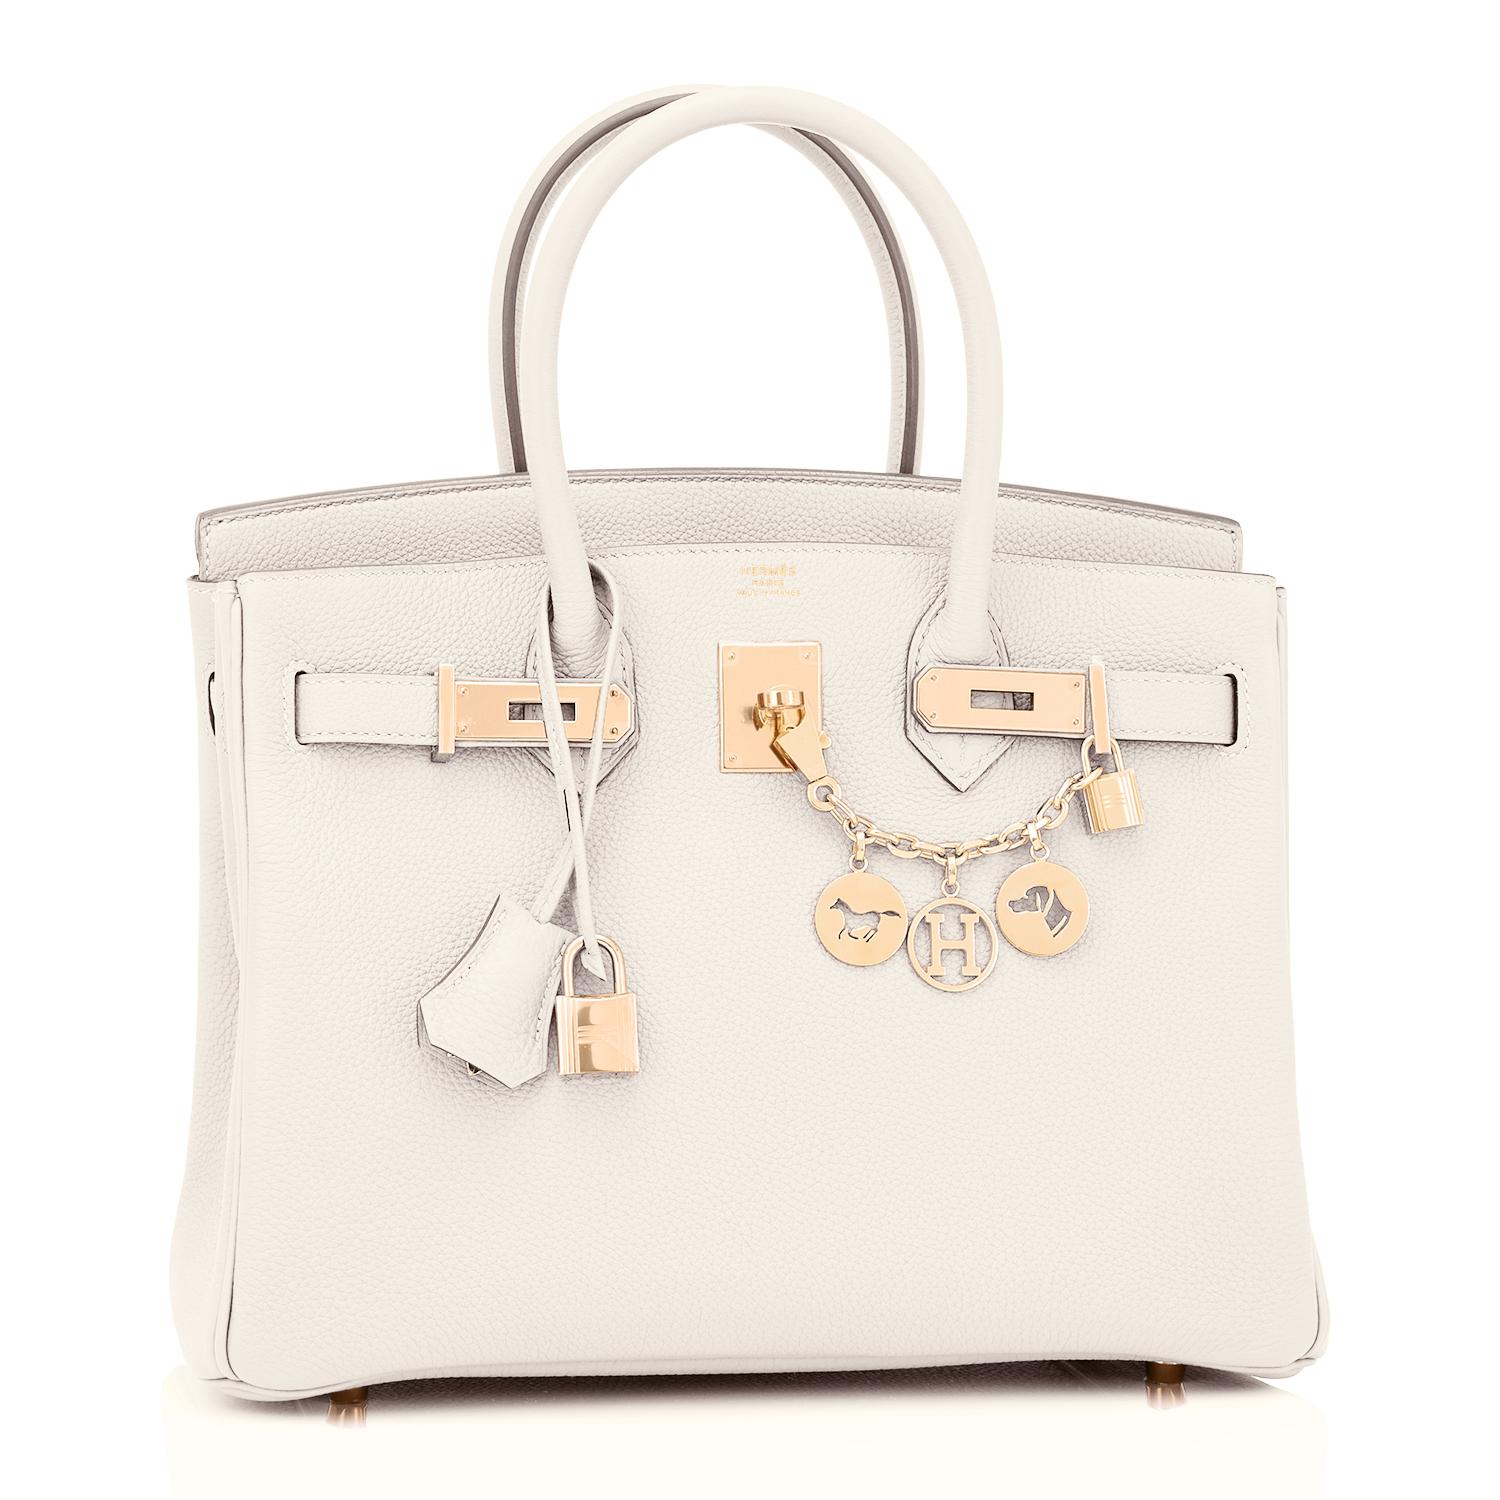 Hermes Craie 30cm Birkin Togo Rose Gold Hardware Chalk Off White Y Stamp, 2020
Just purchased from Hermes store; bag bears new interior 2020 Y Stamp.
Brand New in Box. Store fresh. Pristine Condition (plastic on hardware.)
Perfect gift! Comes in